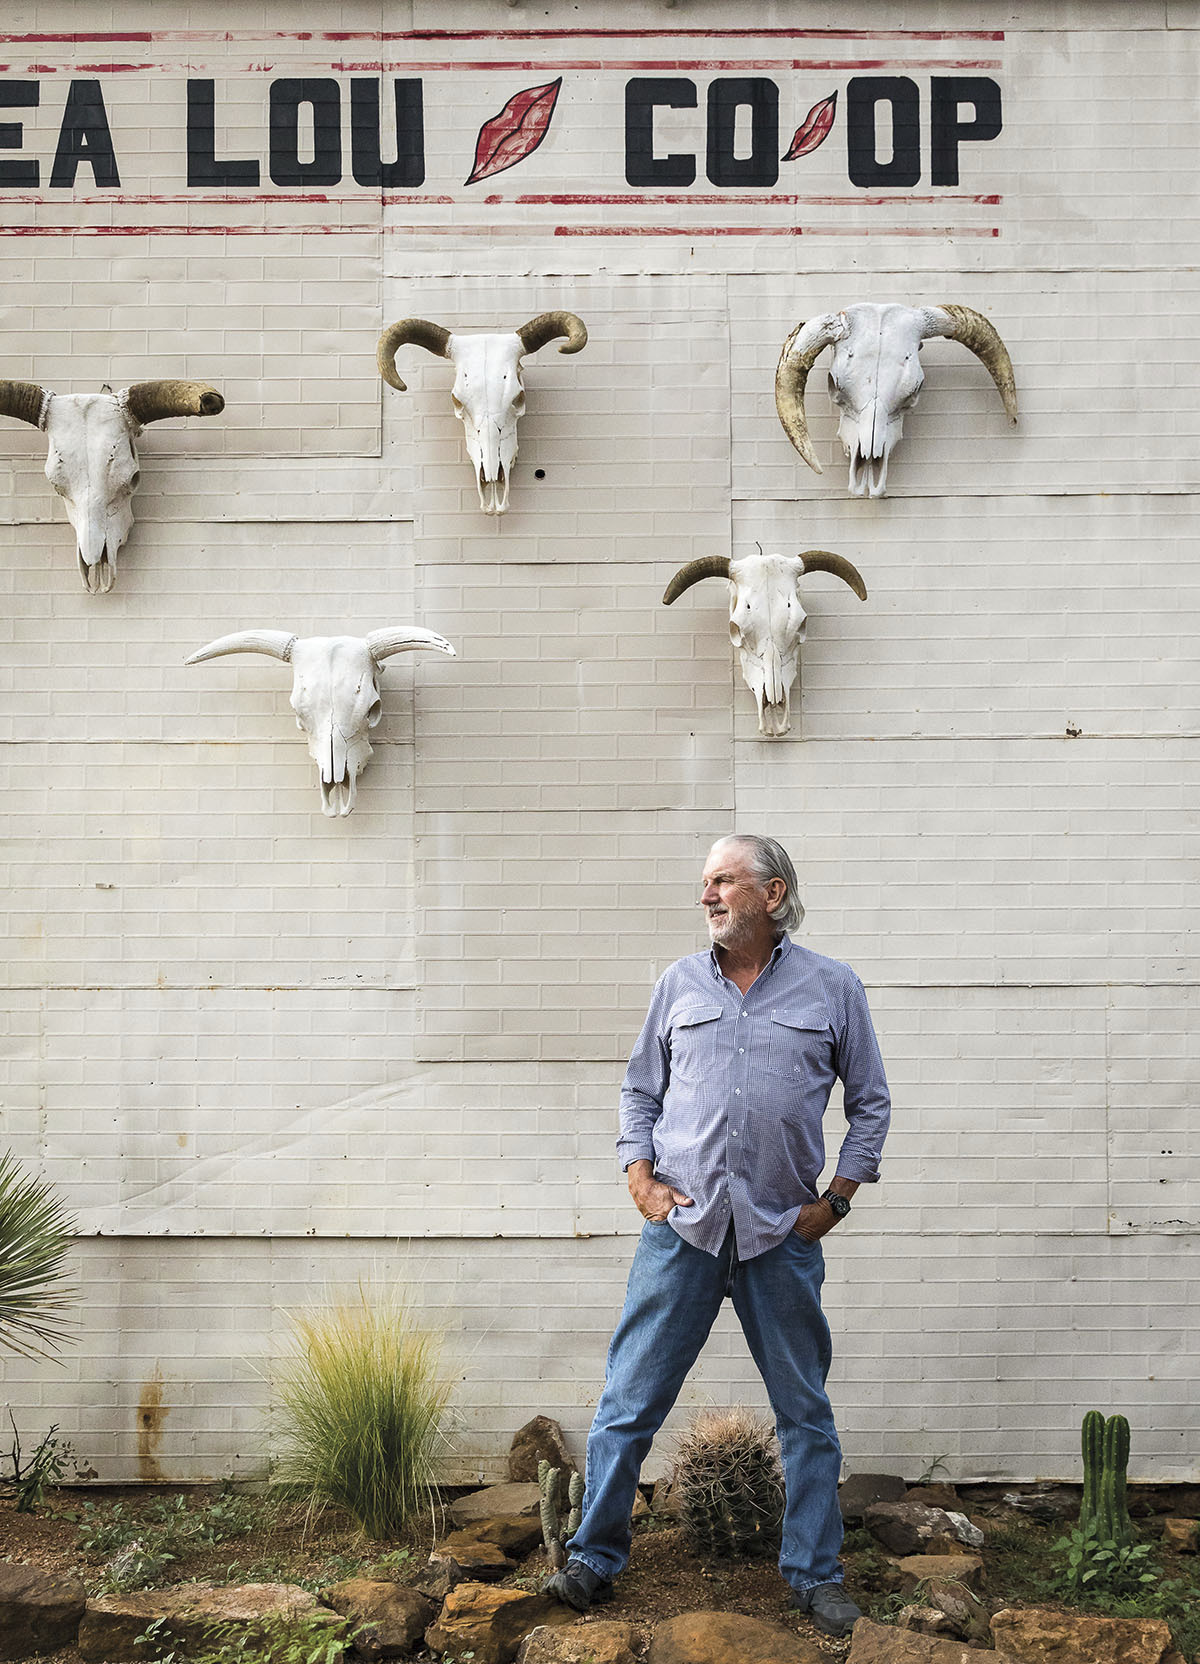 Andy Smith at Lea Lou Co-Op and 21 Club. Cattle skulls hang on the wall behind him